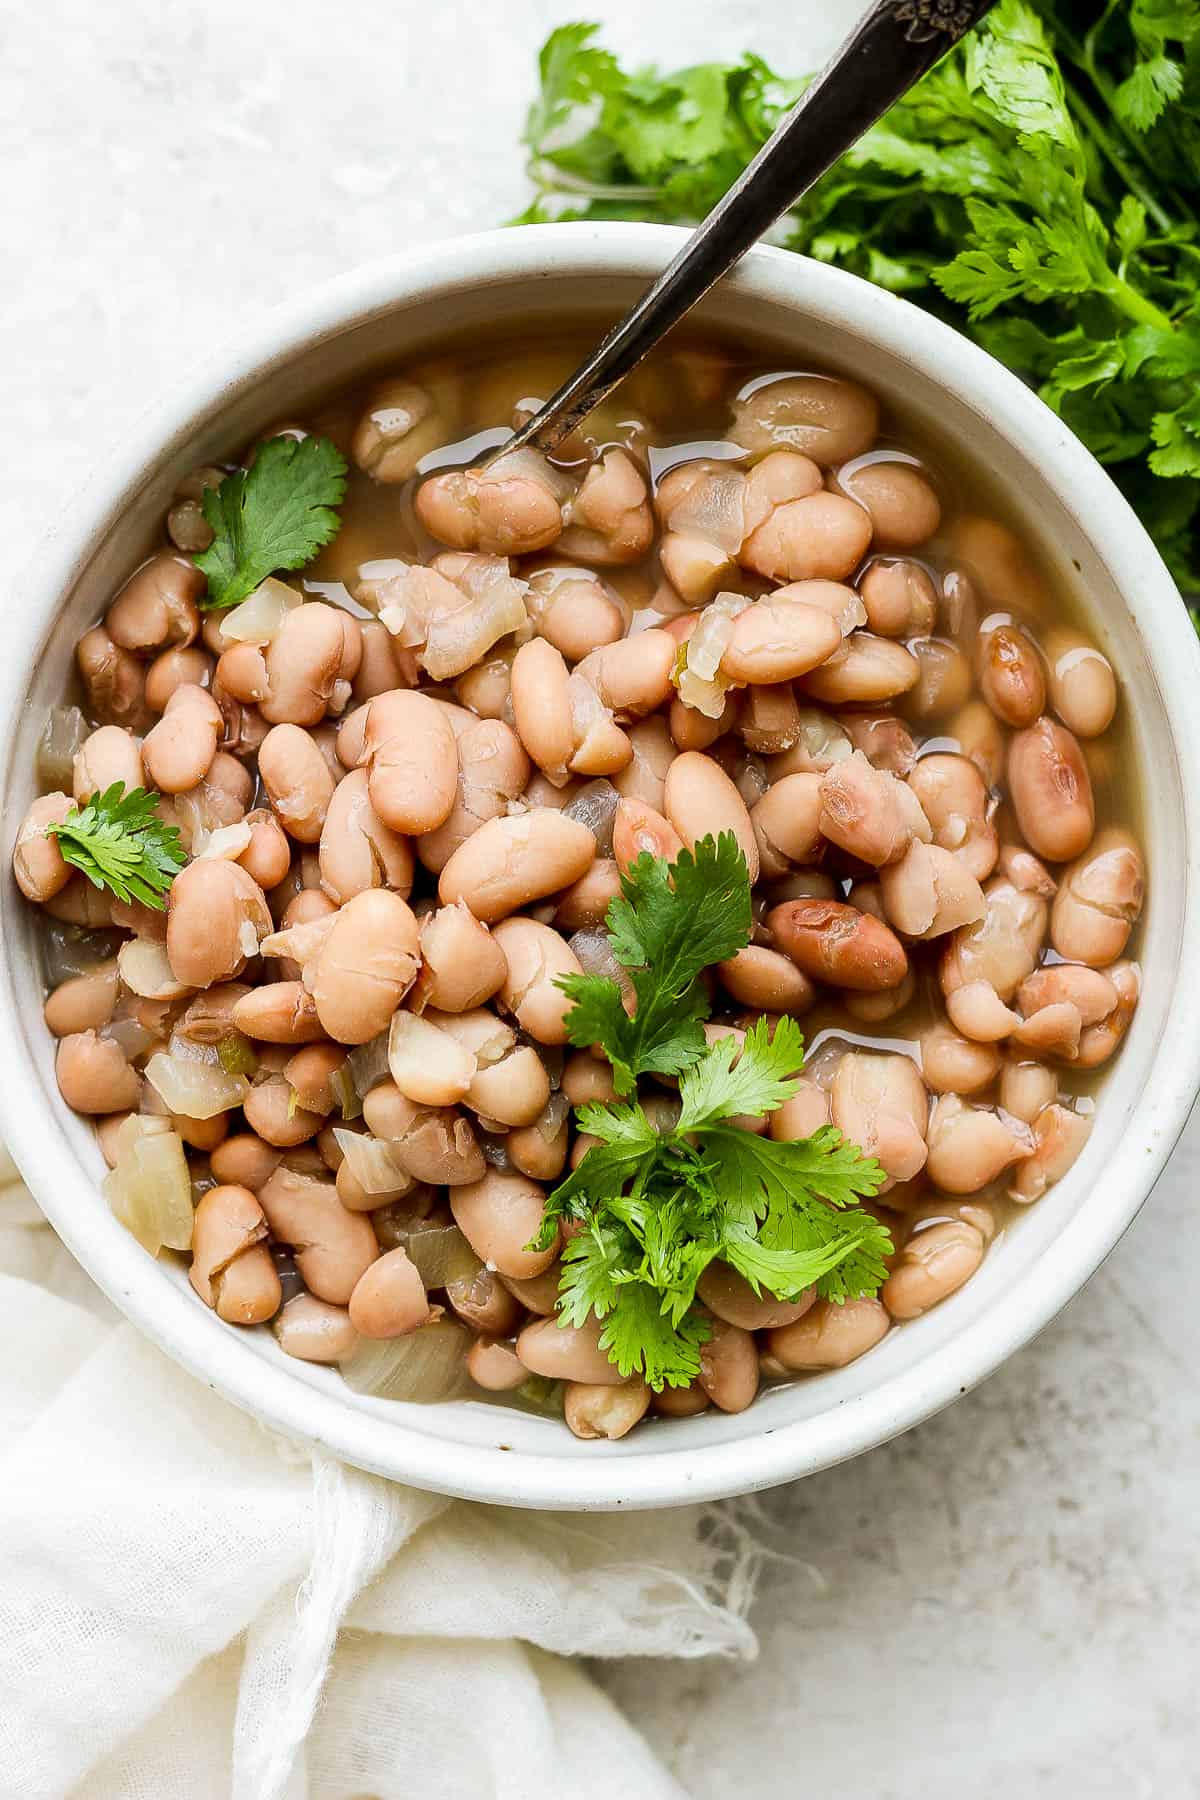 Pinto beans in a bowl garnished with cilantro.